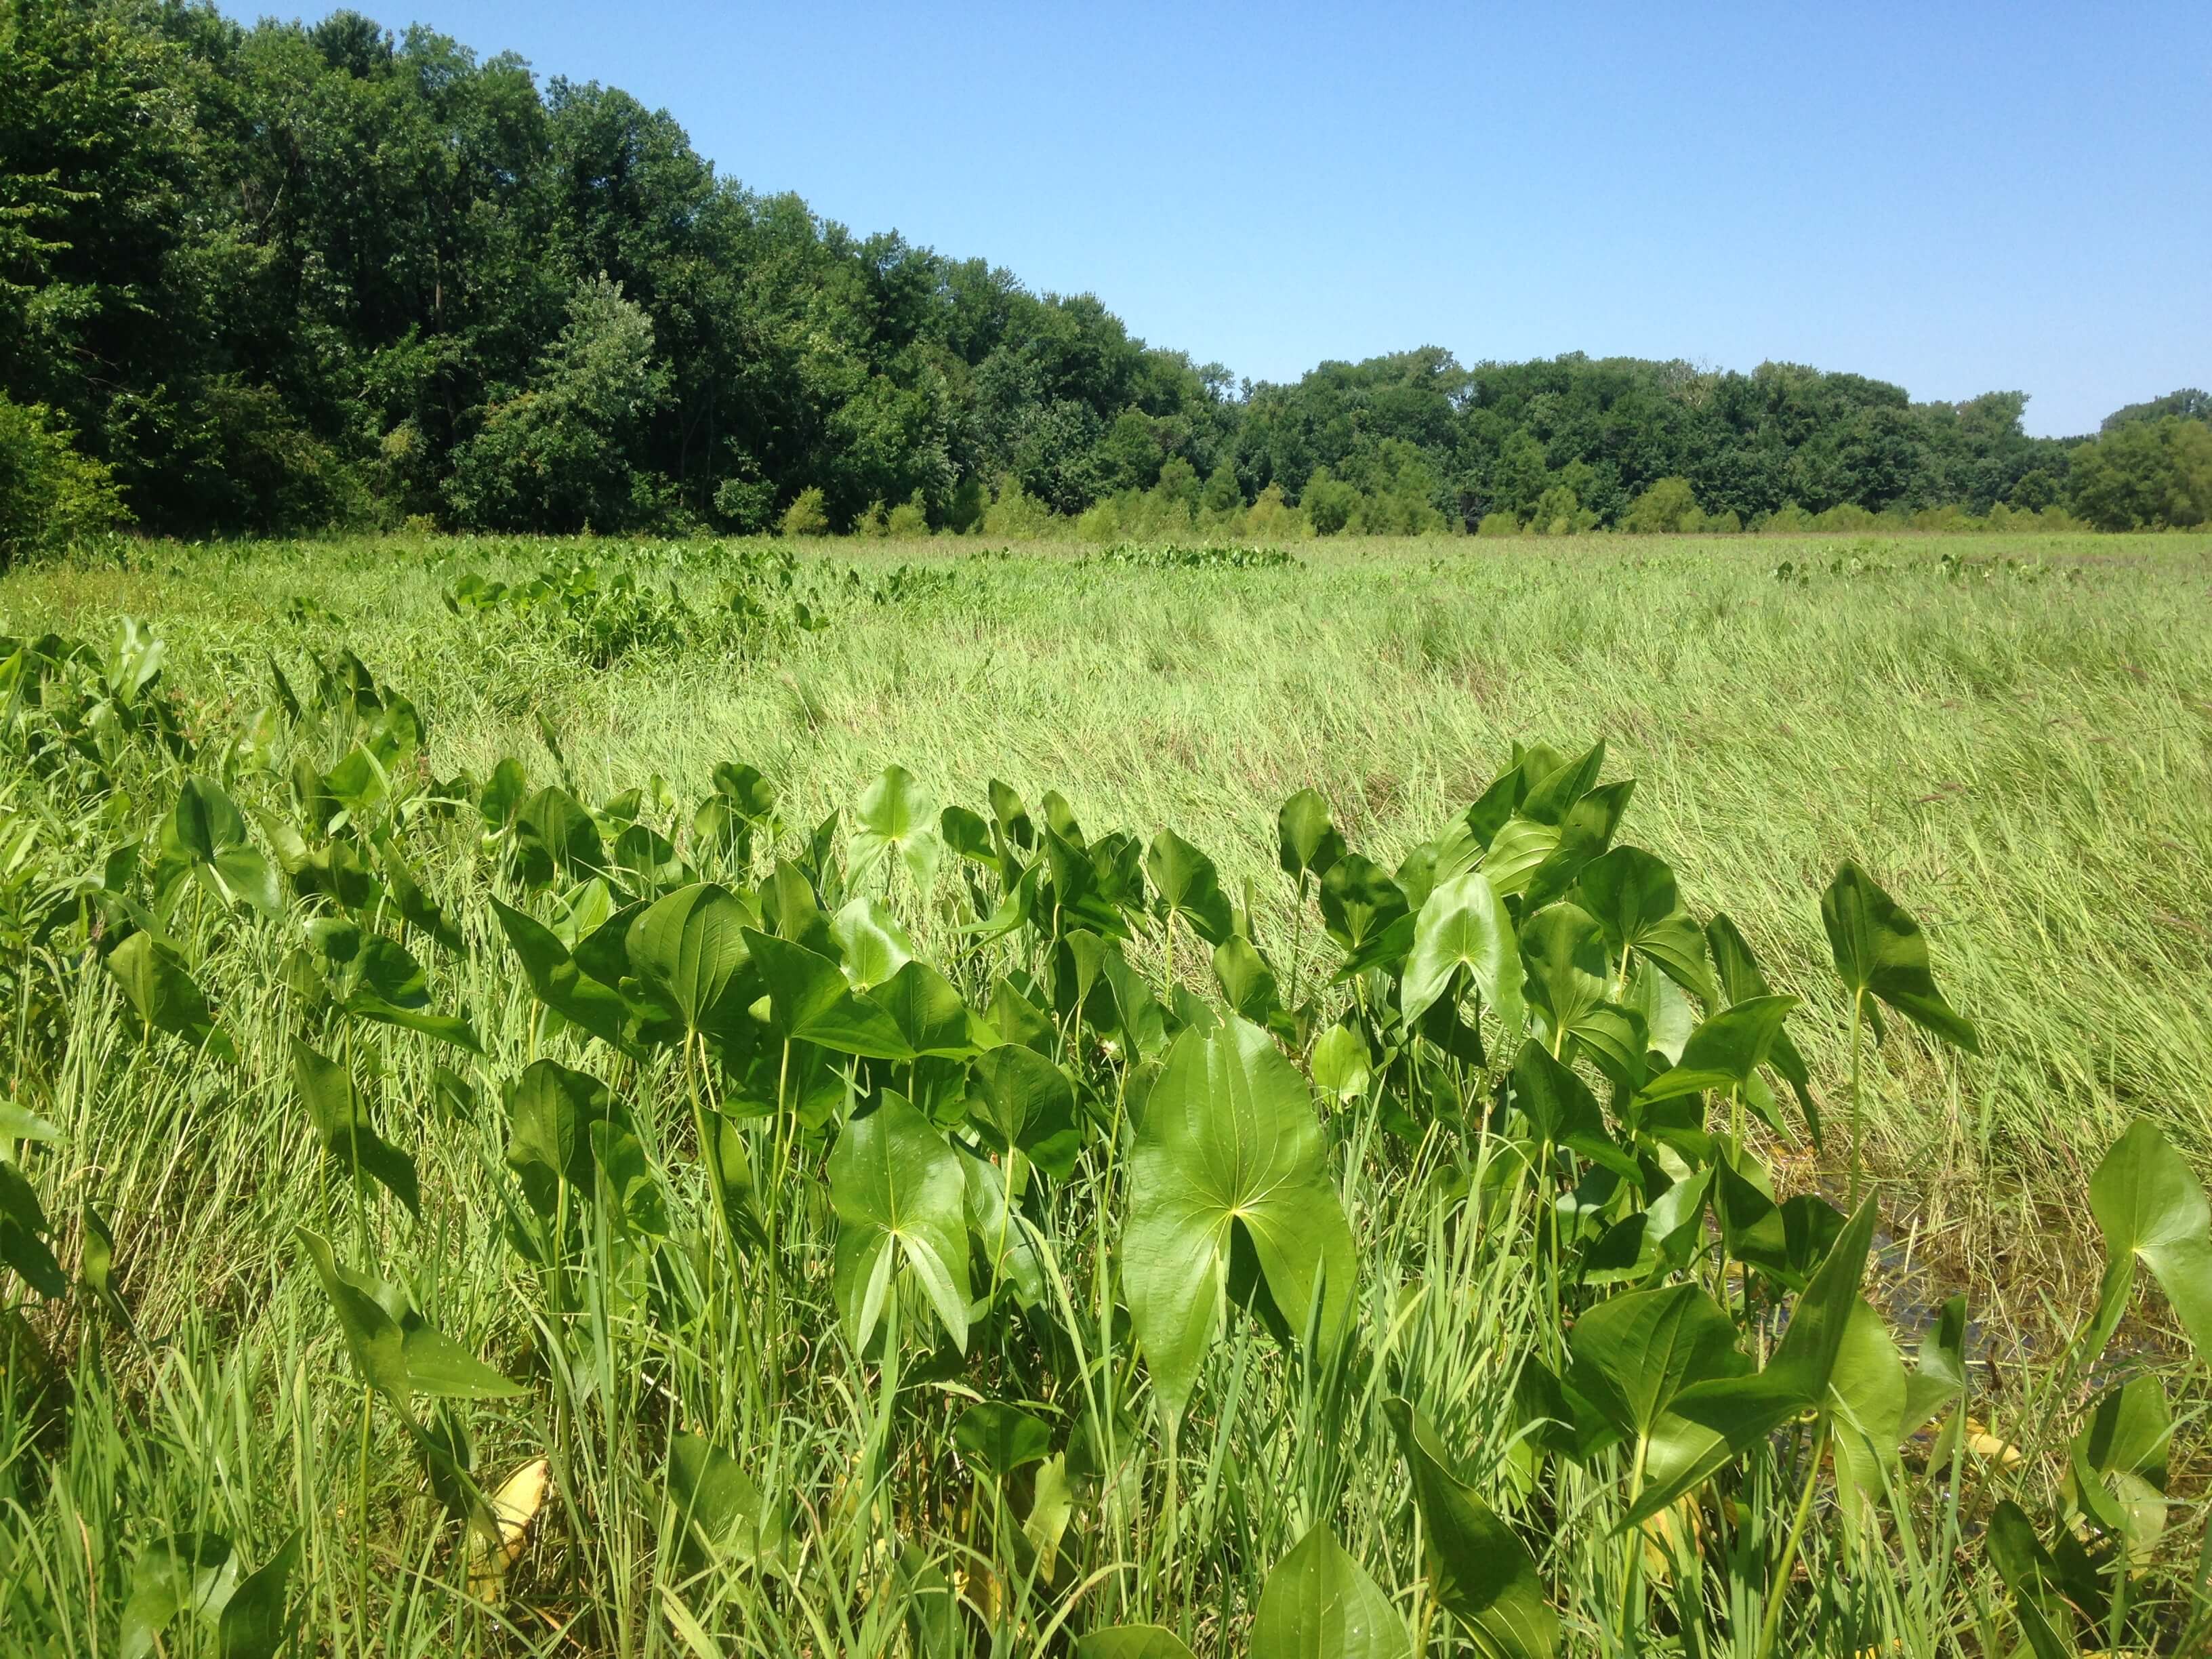 Common arrowhead returns to Mel Price Pool in a backwater area near Alton, Illinois. Beds of this perennial plant are present as a result of changes in dam operations during the summer growing season.